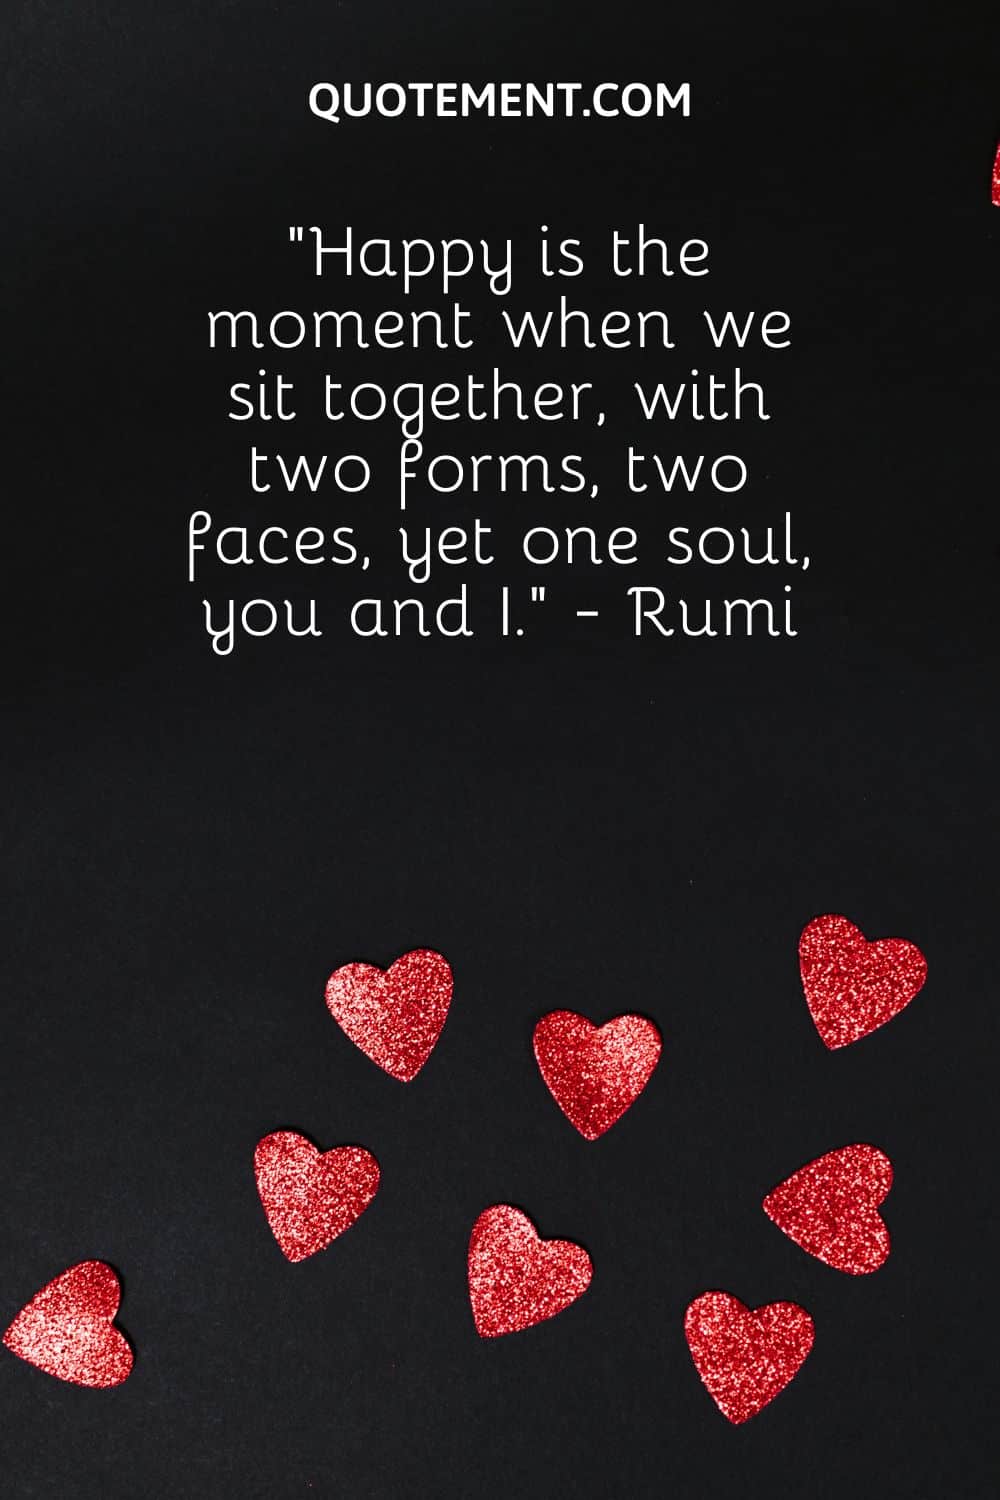 “Happy is the moment when we sit together, with two forms, two faces, yet one soul, you and I.” - Rumi